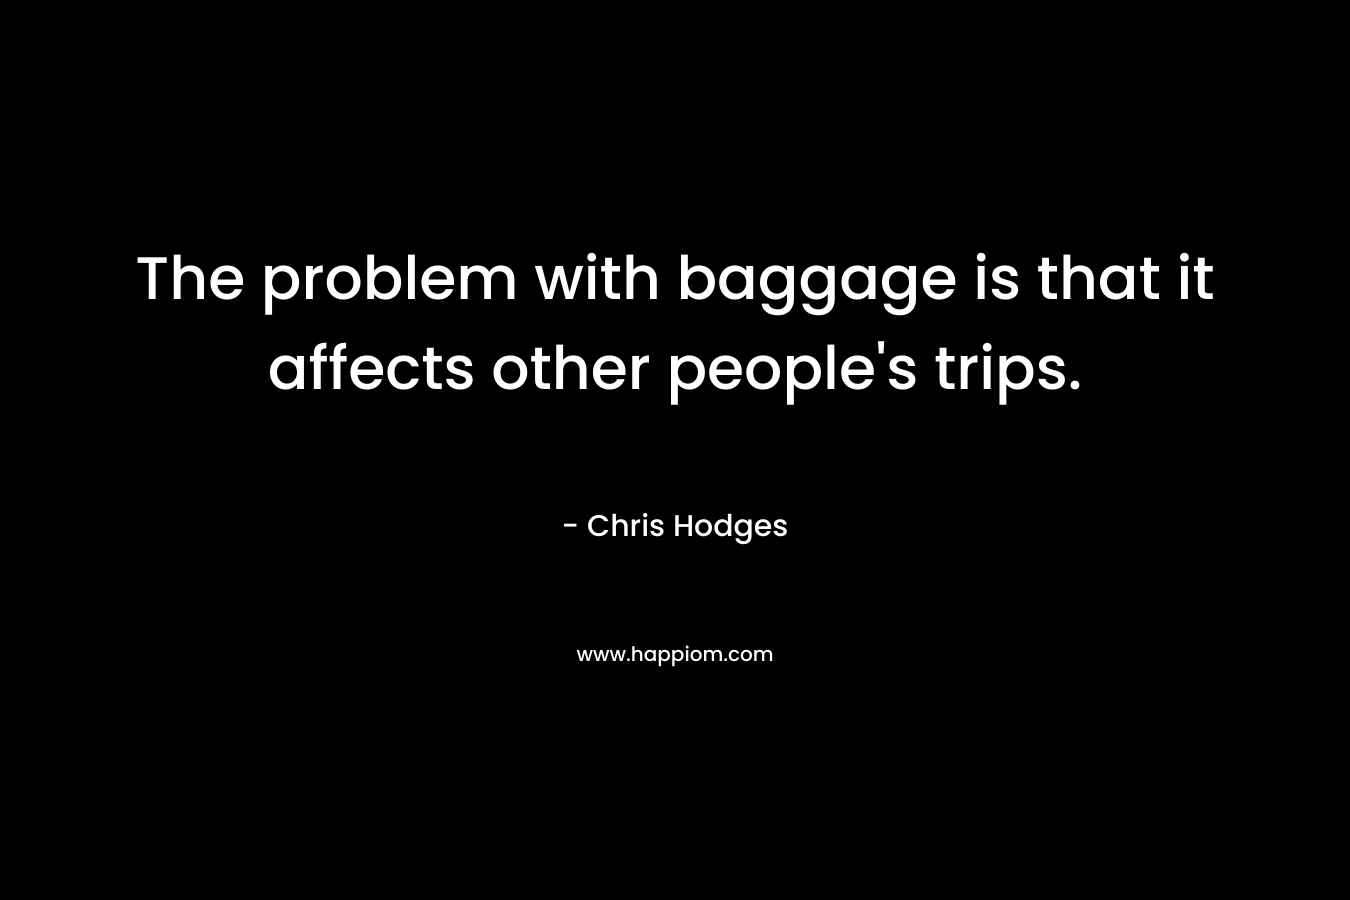 The problem with baggage is that it affects other people’s trips. – Chris Hodges